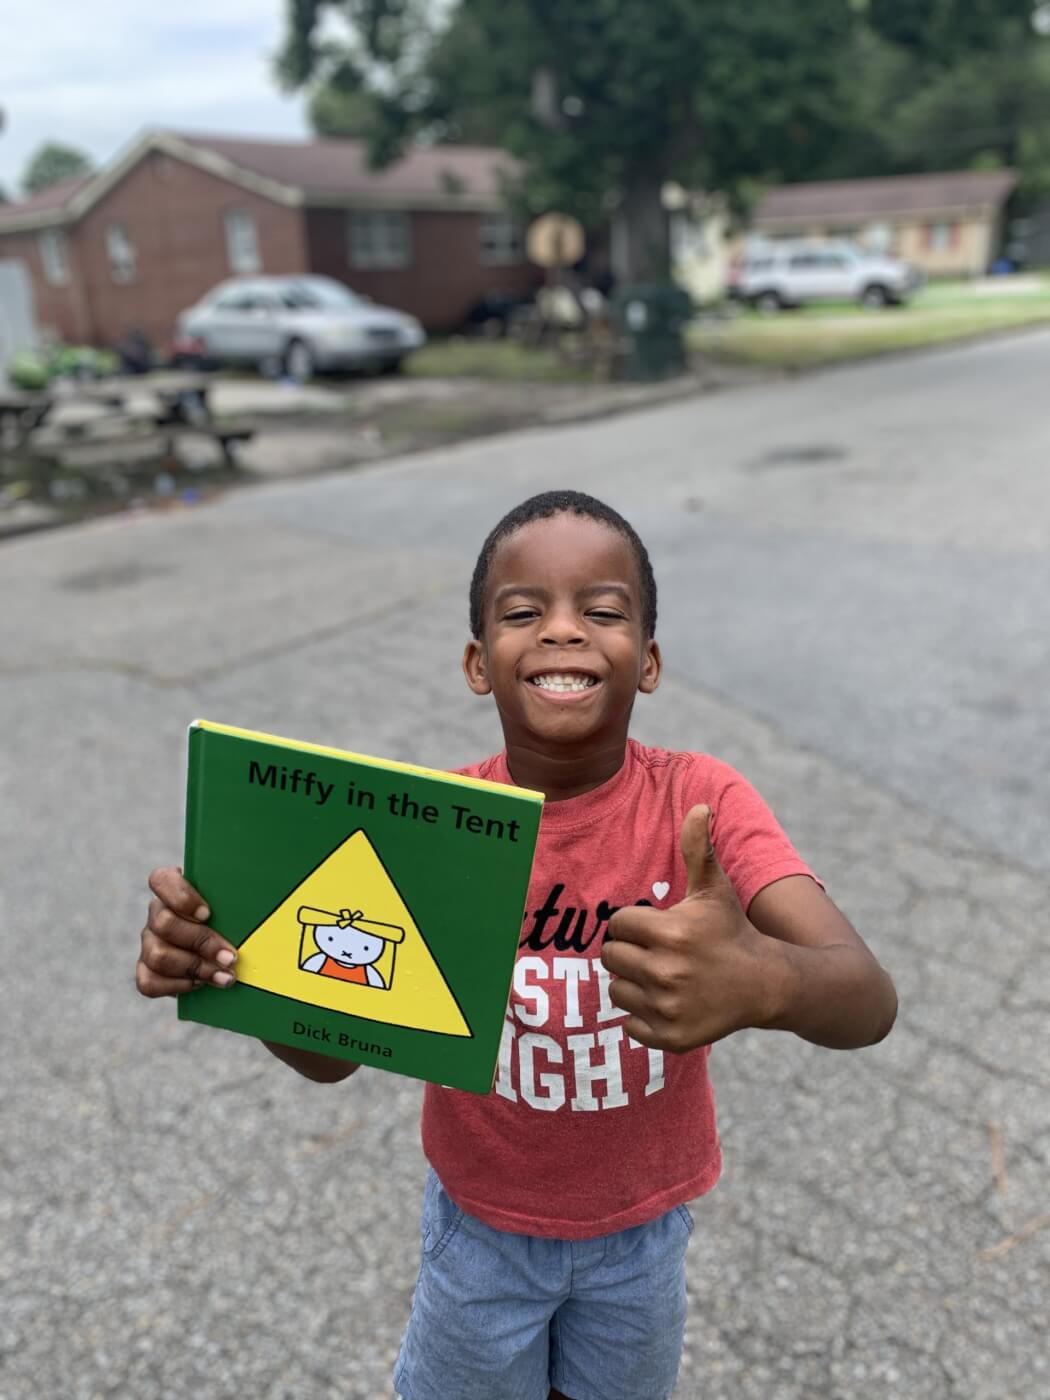 A kid smiles with an animal-friendly book from PETA fieldworkers